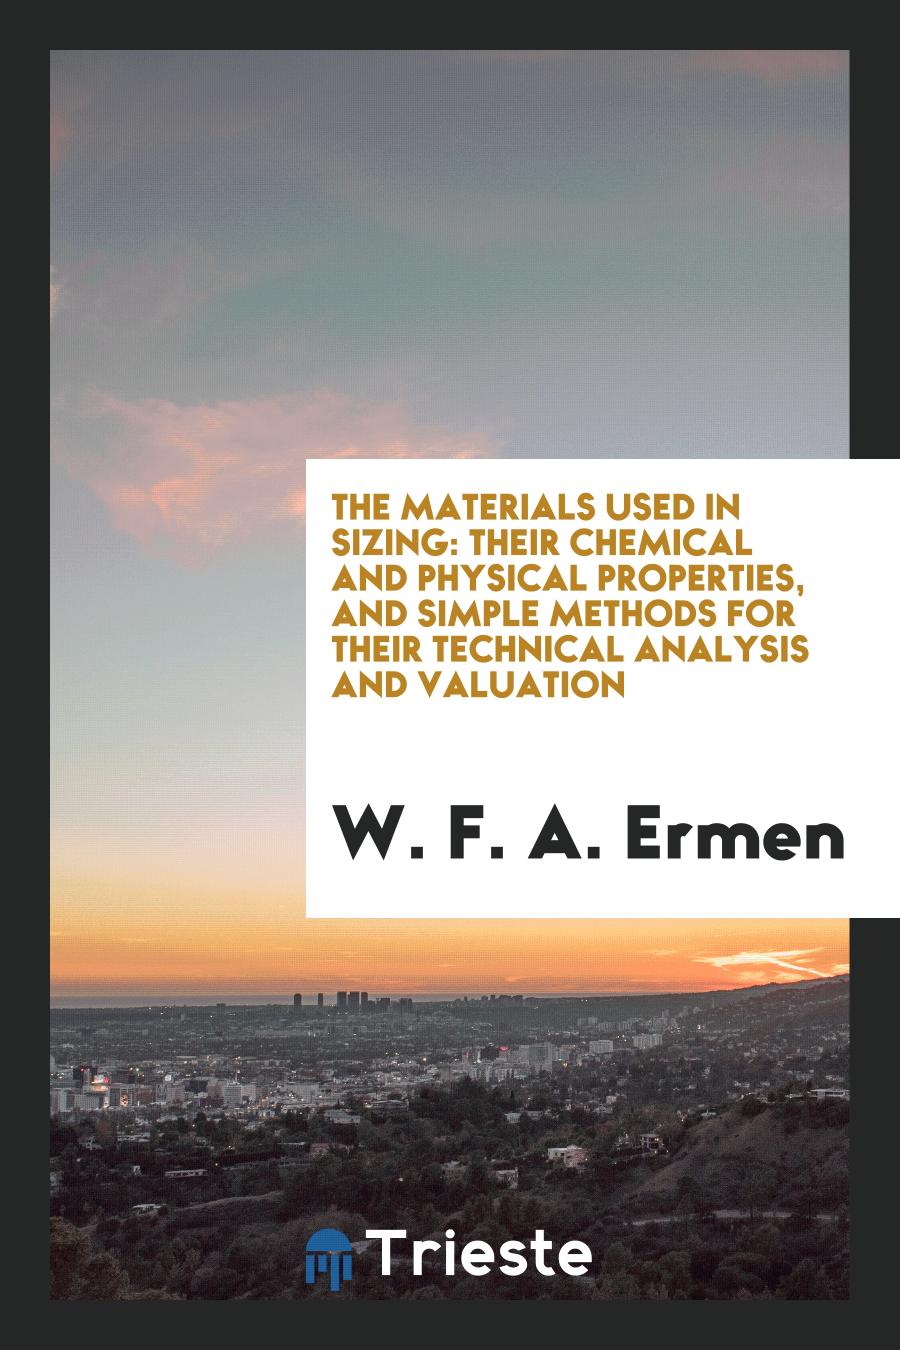 The Materials Used in Sizing: Their Chemical and Physical Properties, and Simple Methods for Their Technical Analysis and Valuation